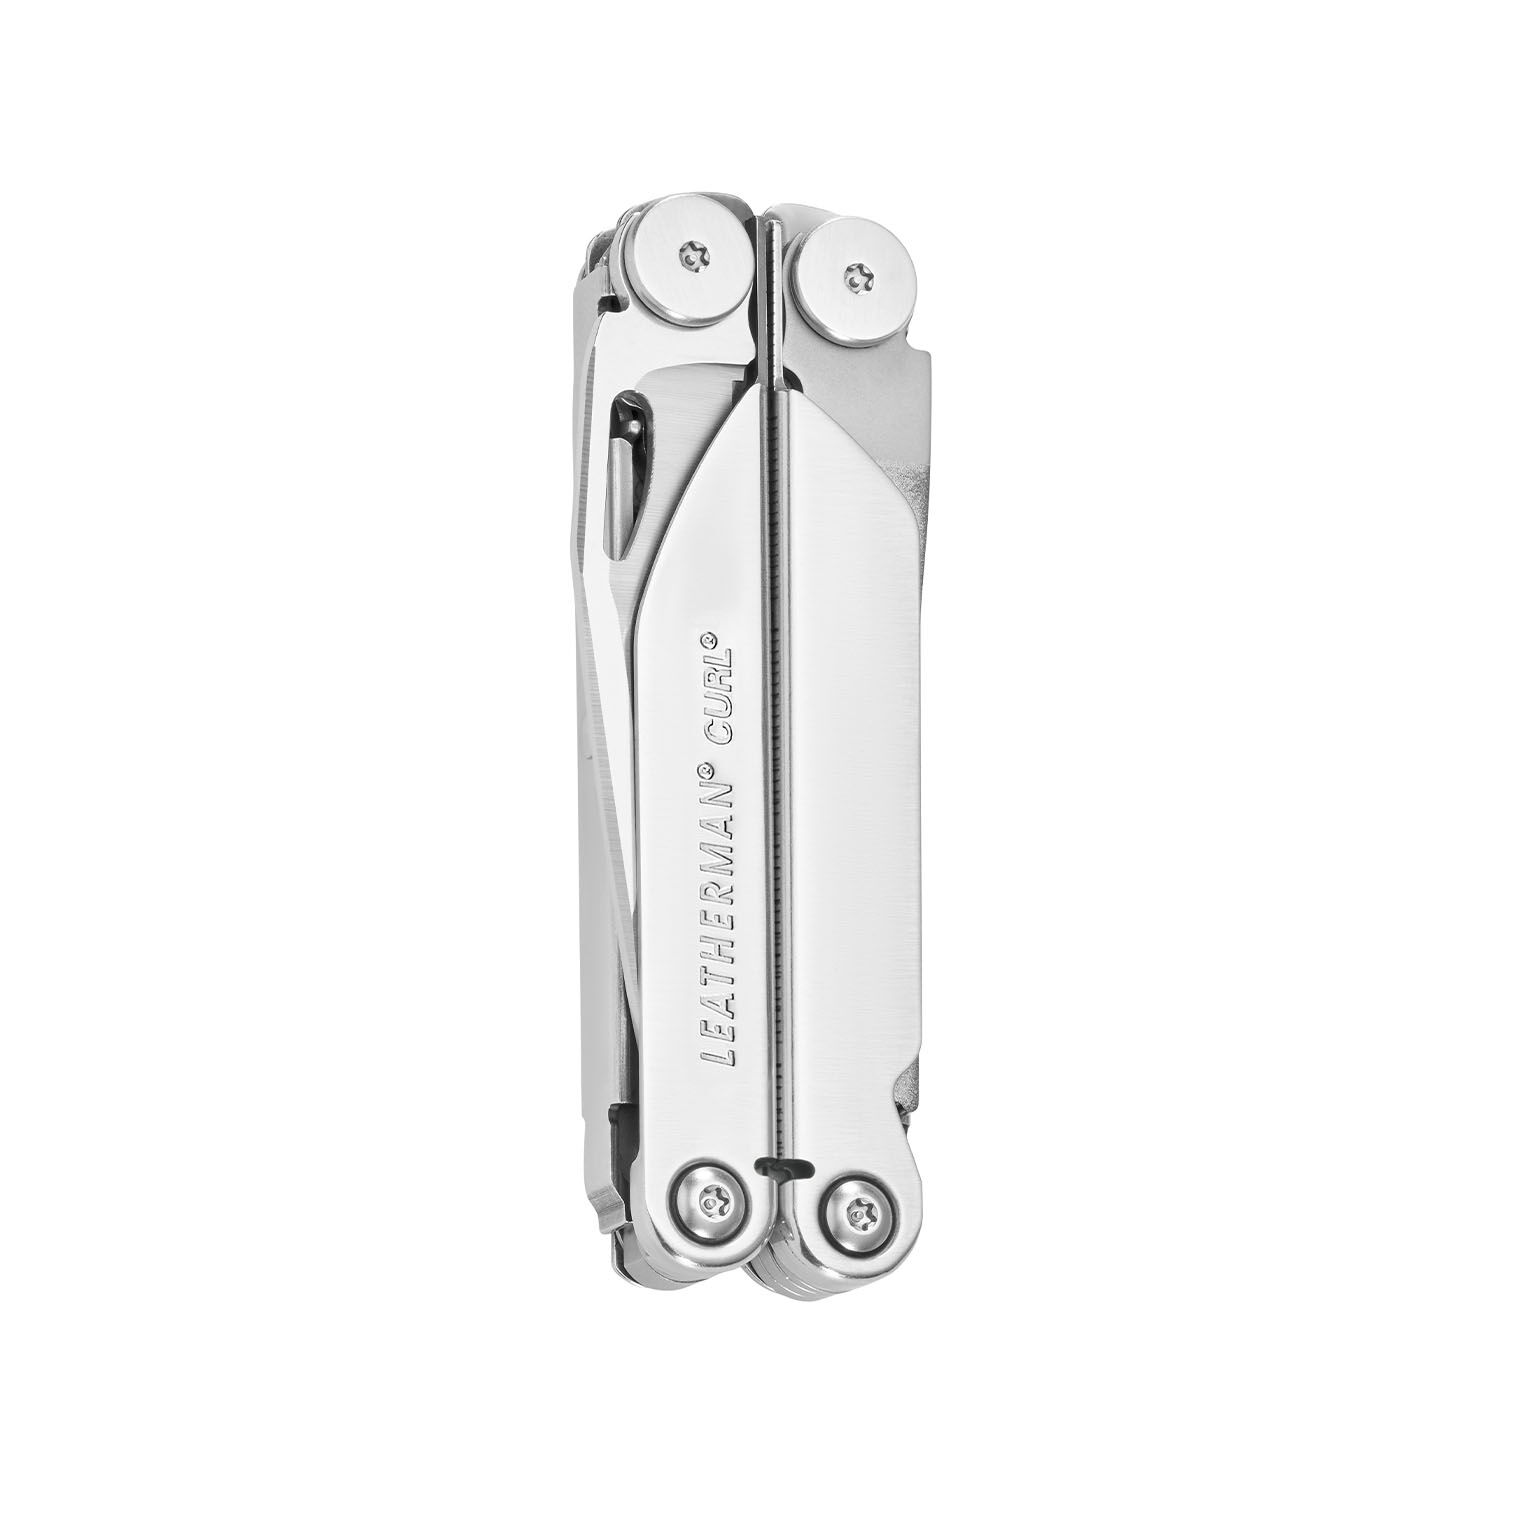 Curl | Everyday Carry Multi-tools | Leatherman Tool Group​​